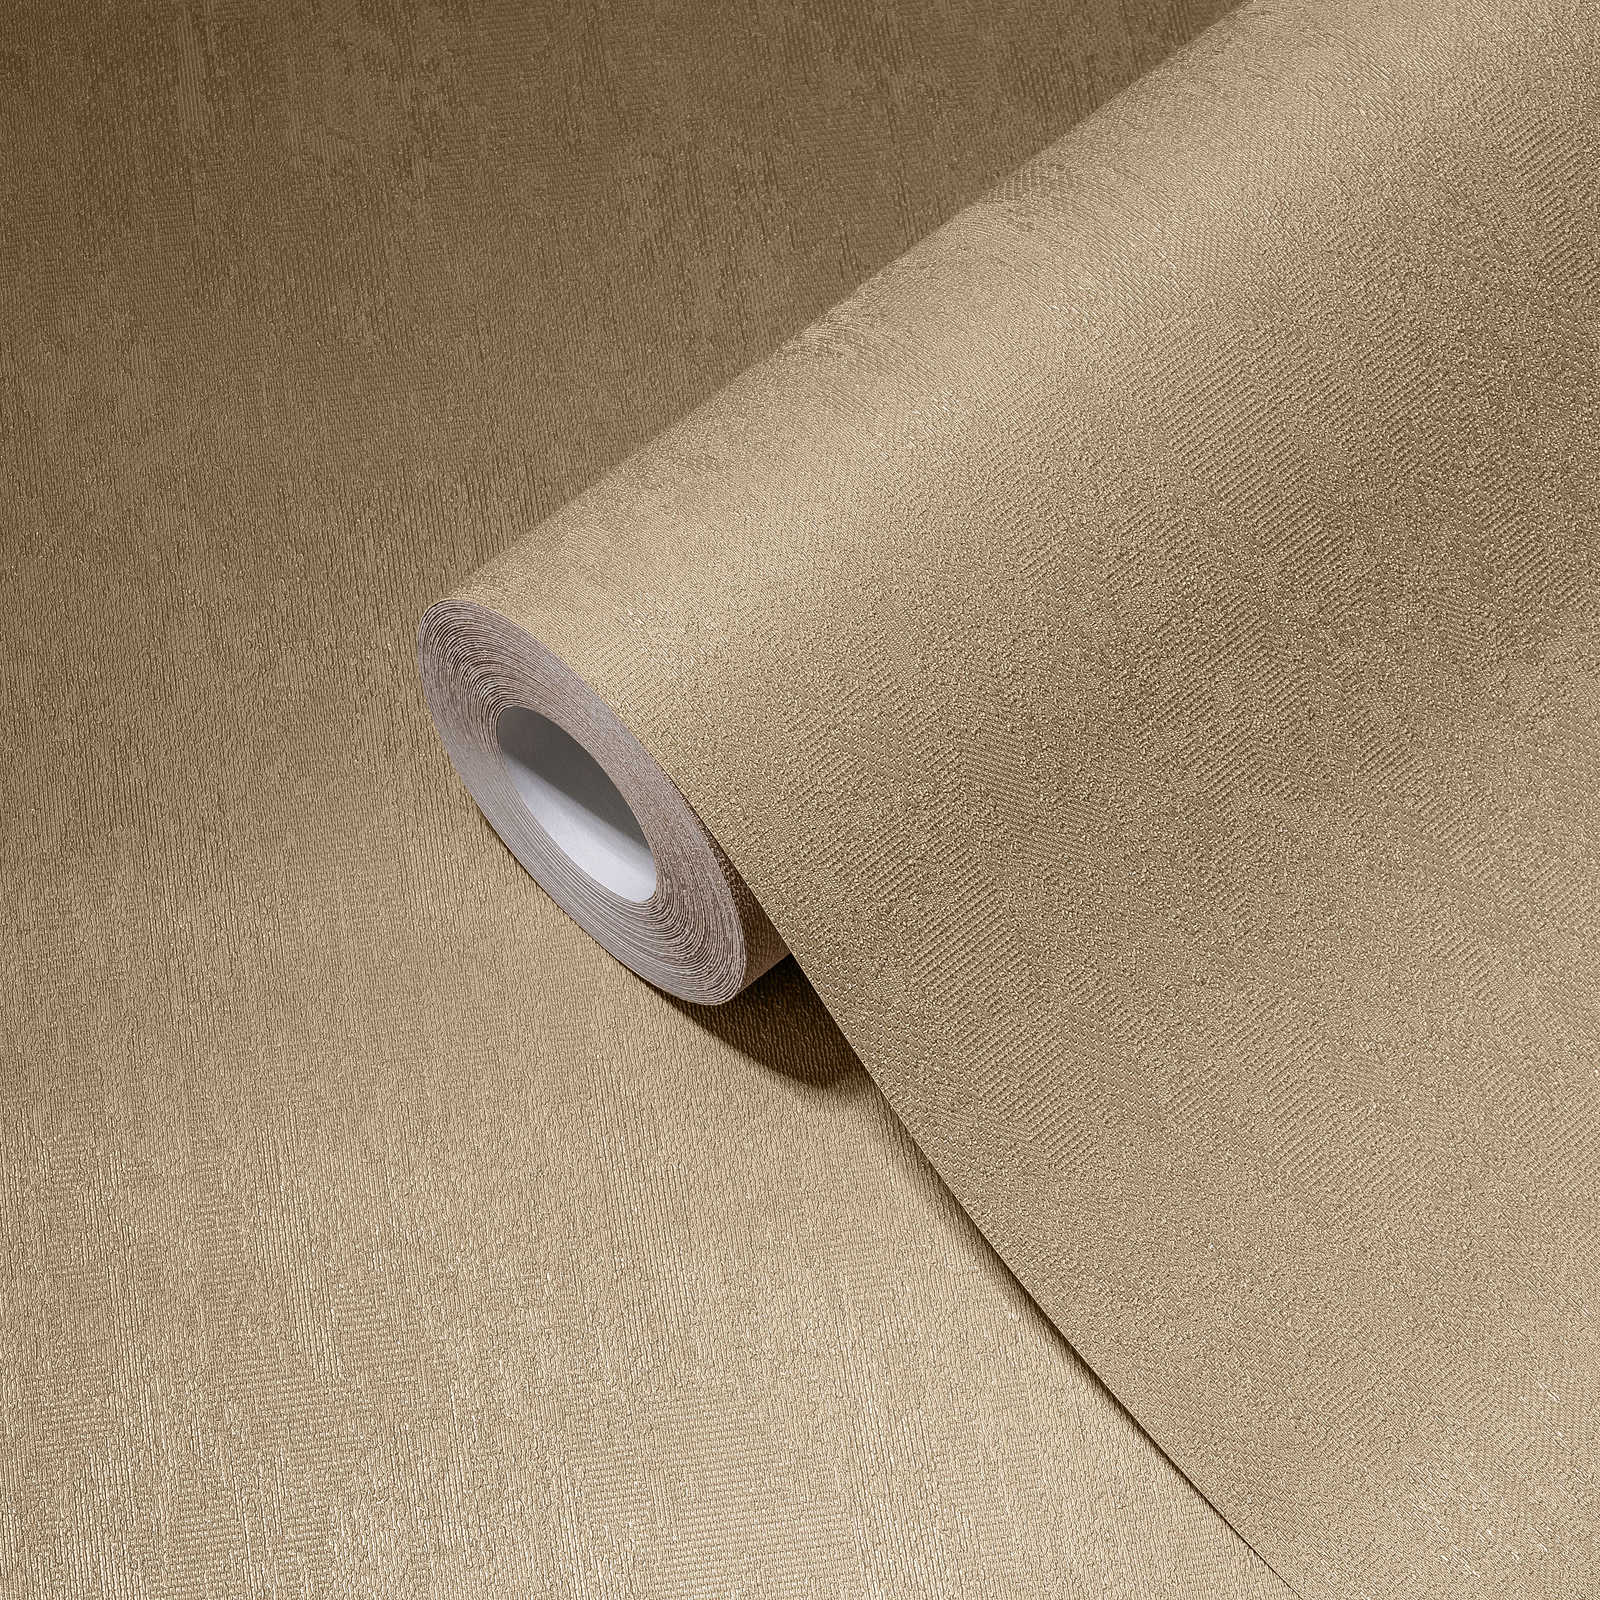             Non-woven wallpaper beige grey with texture design & satin finish
        